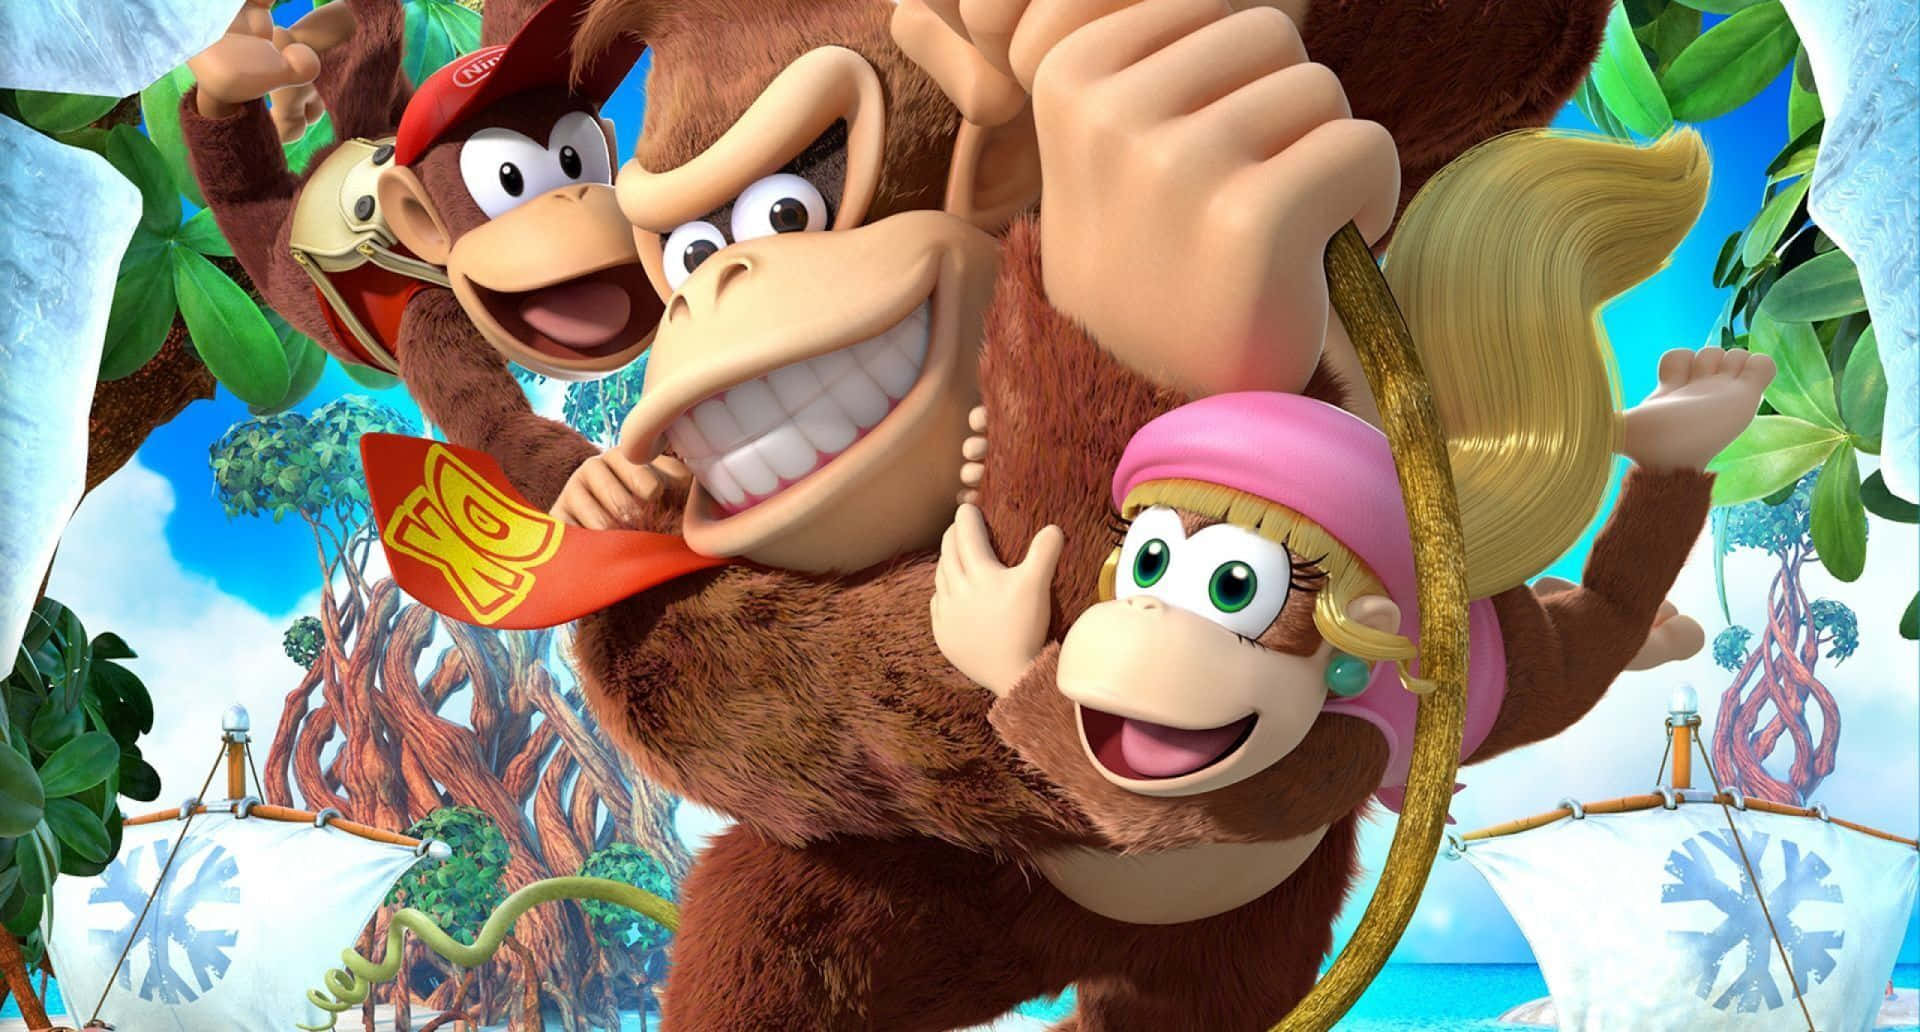 Donkey Kong - Popular Video Game Character Standing Proudly